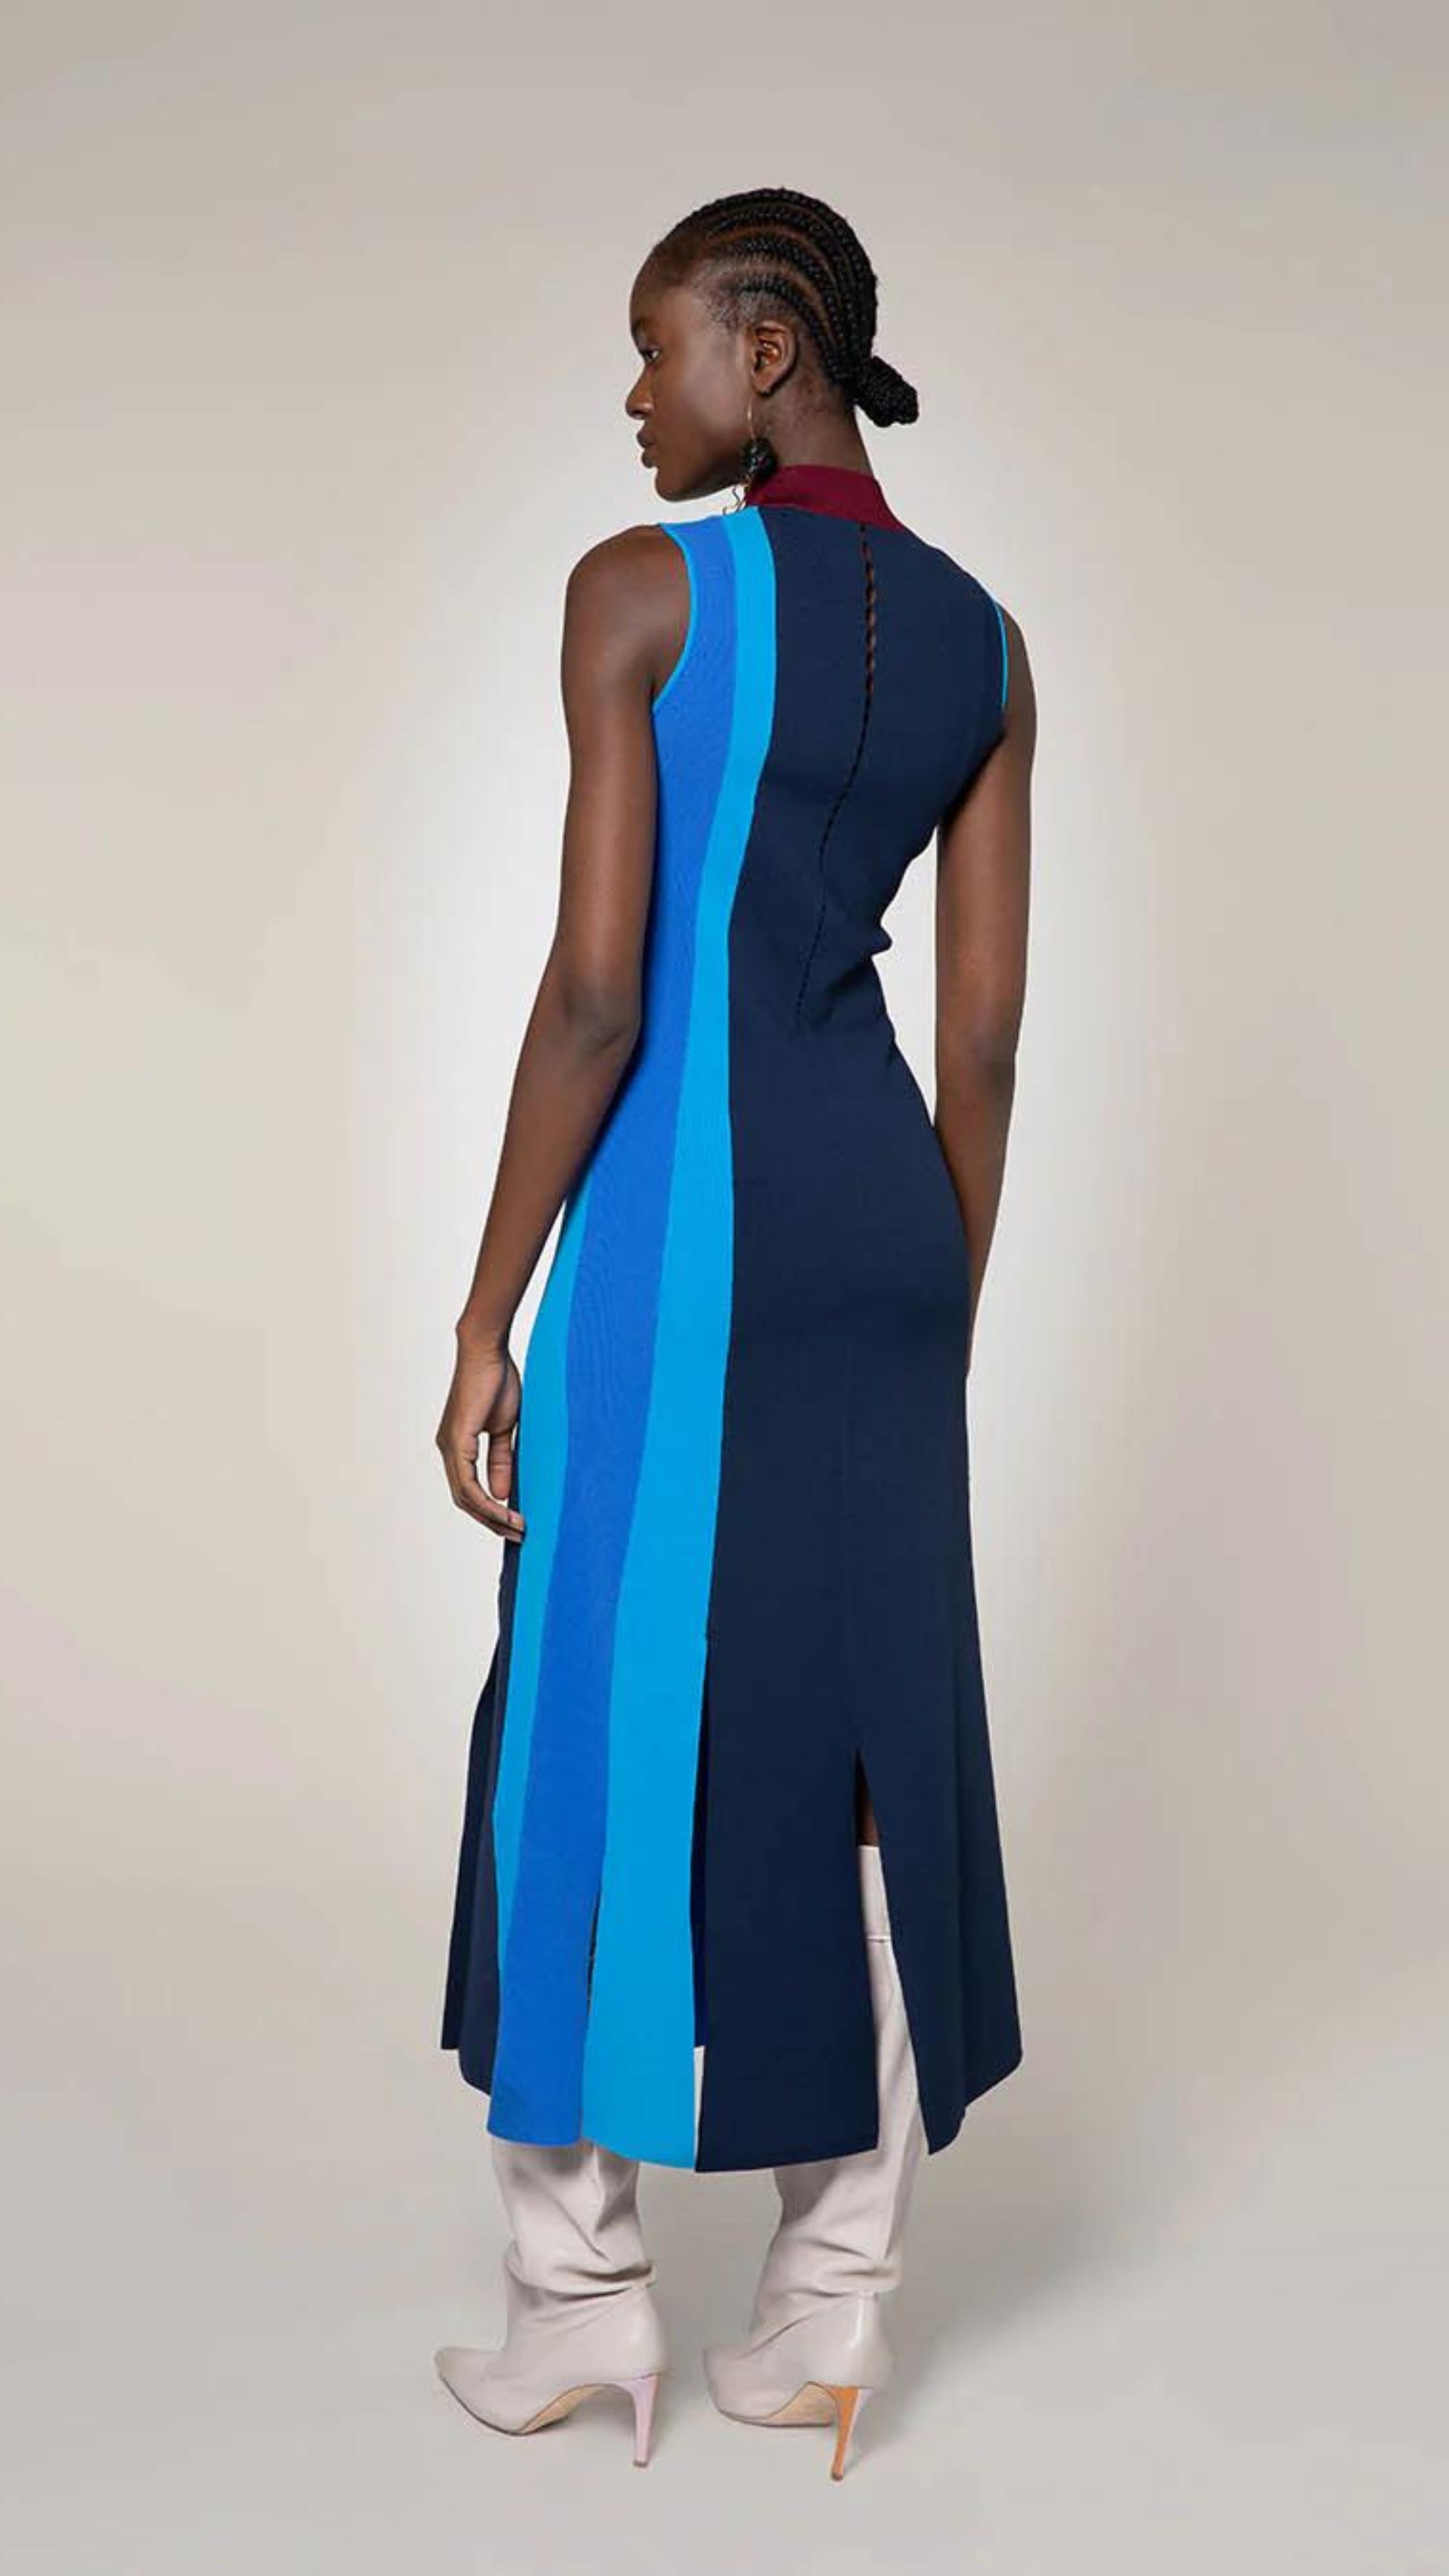 Roksanda Matthiola Knit Dress. Lightweight knit dress in varying blue tone vertical panels. With wide fringe bottom it falls to a midi dress length. A contrasting burgundy color. Shown on model facing back.